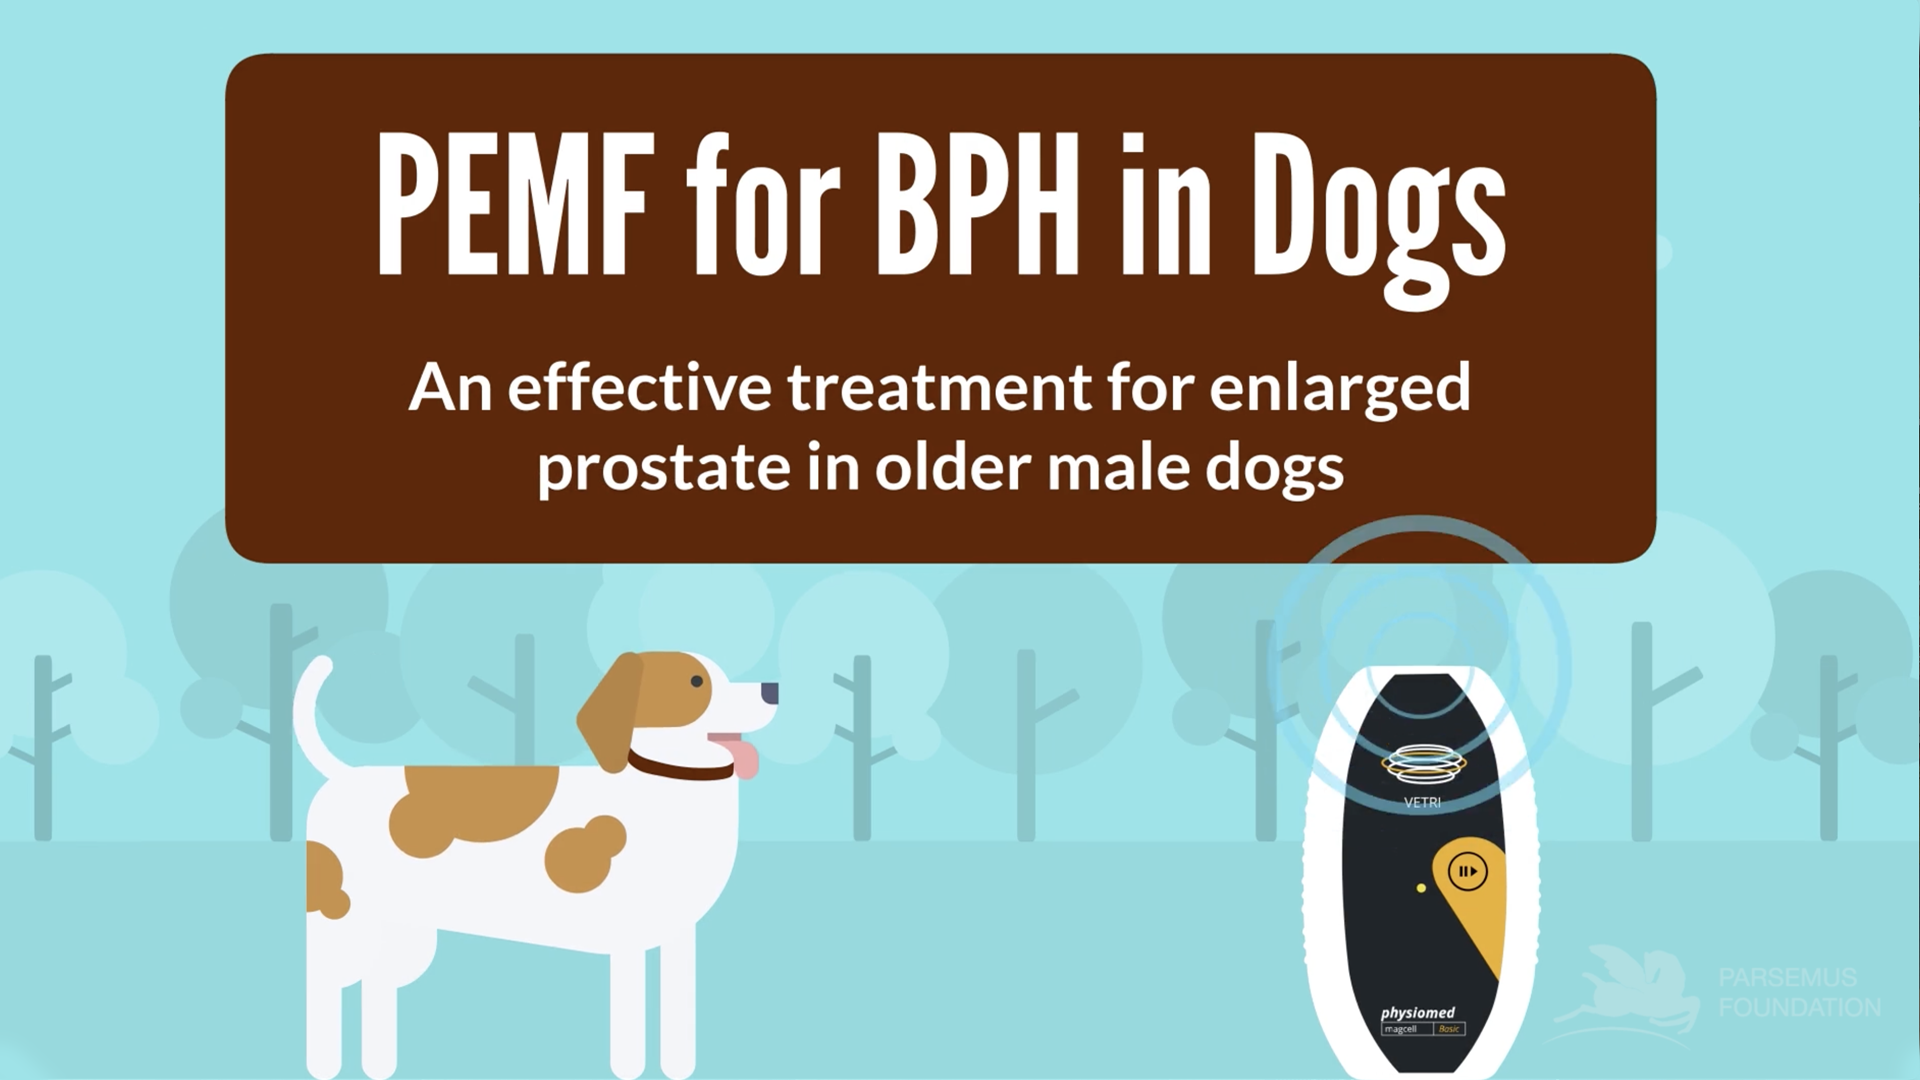 Video about PEMF for BPH in Dogs